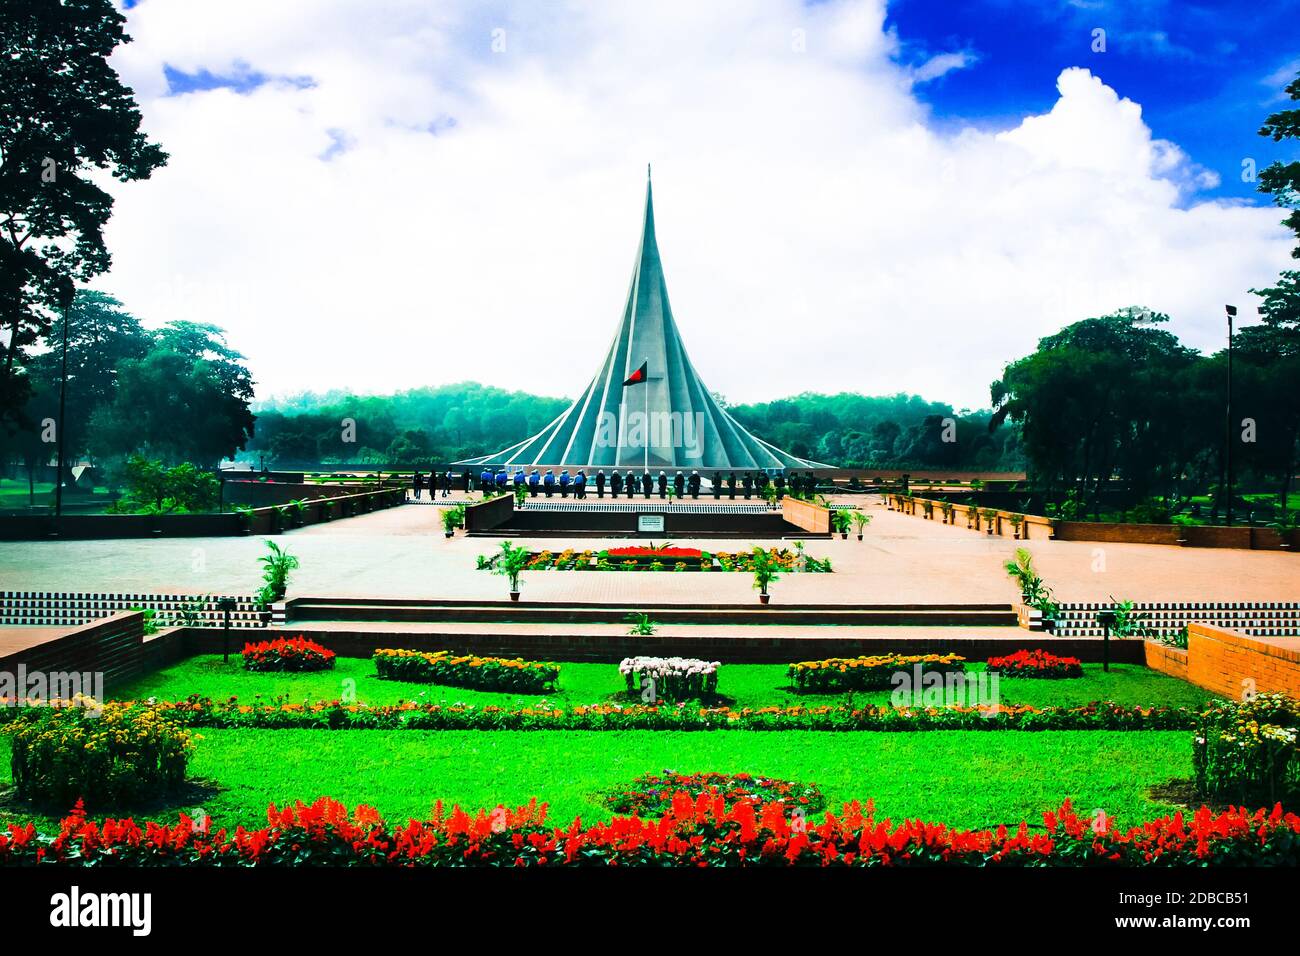 National Martyrs’ Memorial is the national monument of Bangladesh, set up in the memory of those who died in the Bangladesh Liberation War of 1971. Stock Photo